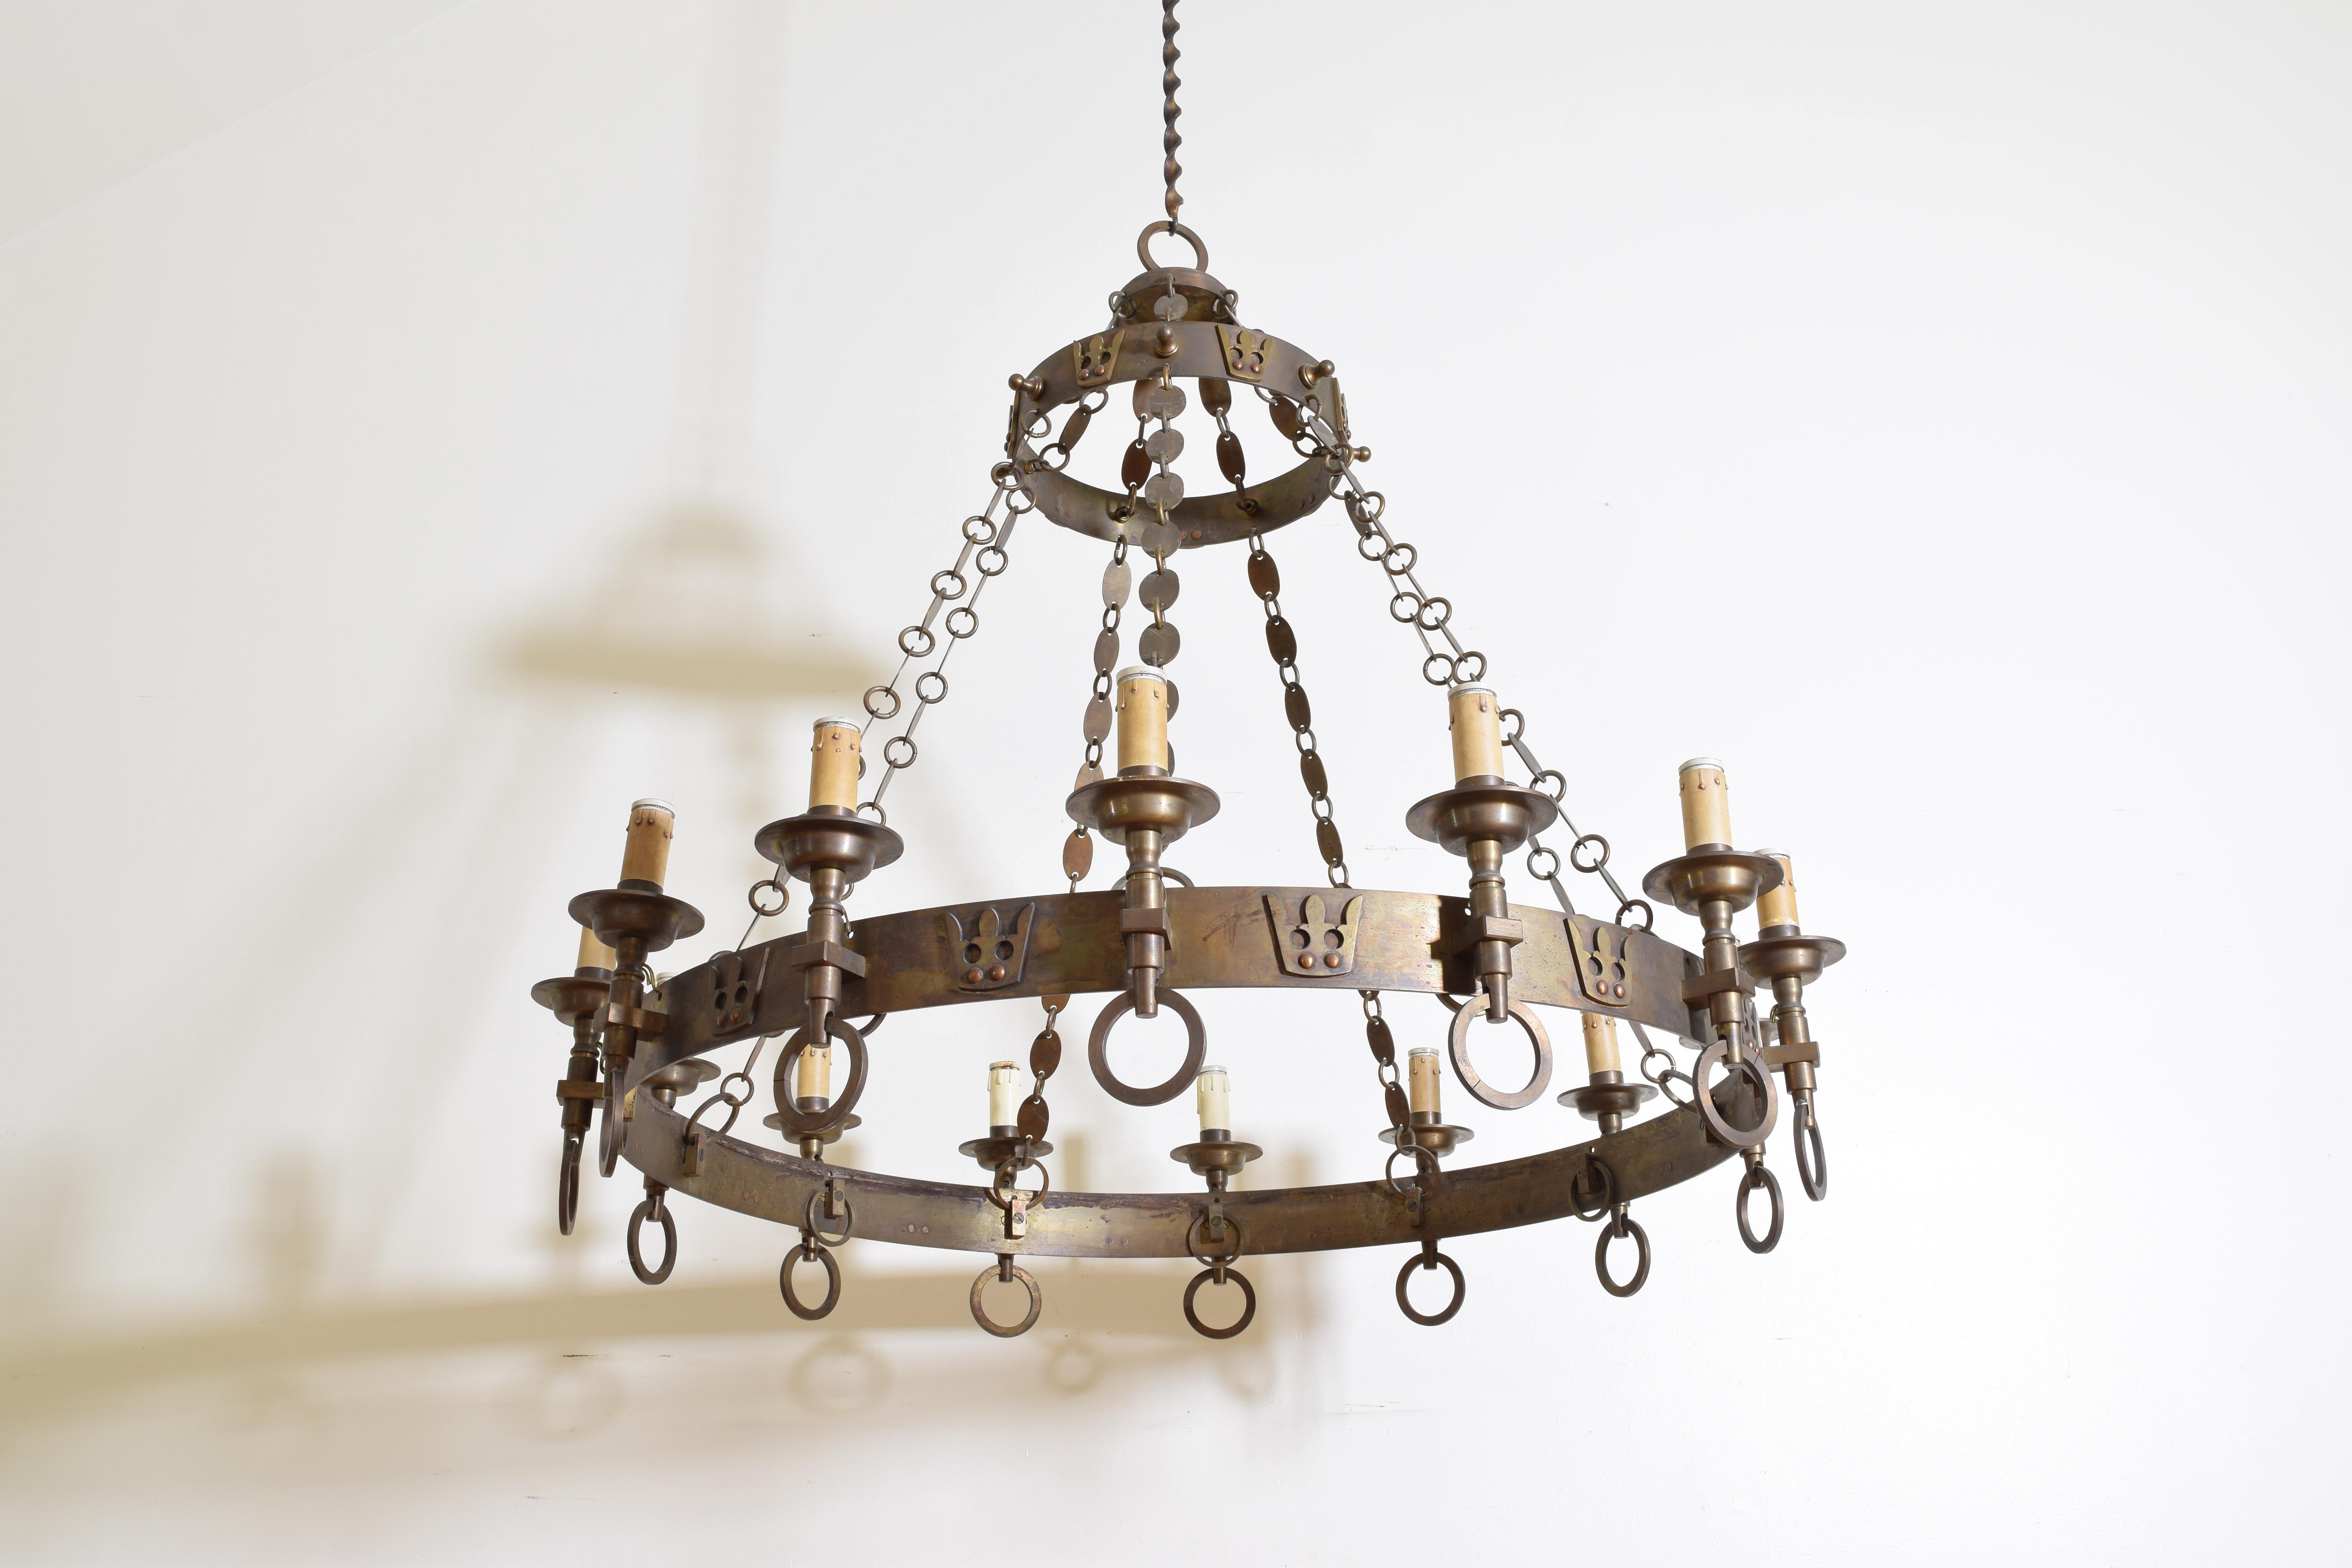 Arts and Crafts Italian Arts & Crafts Period Brass 14-Light Chandelier, circa 1900, UL Wired